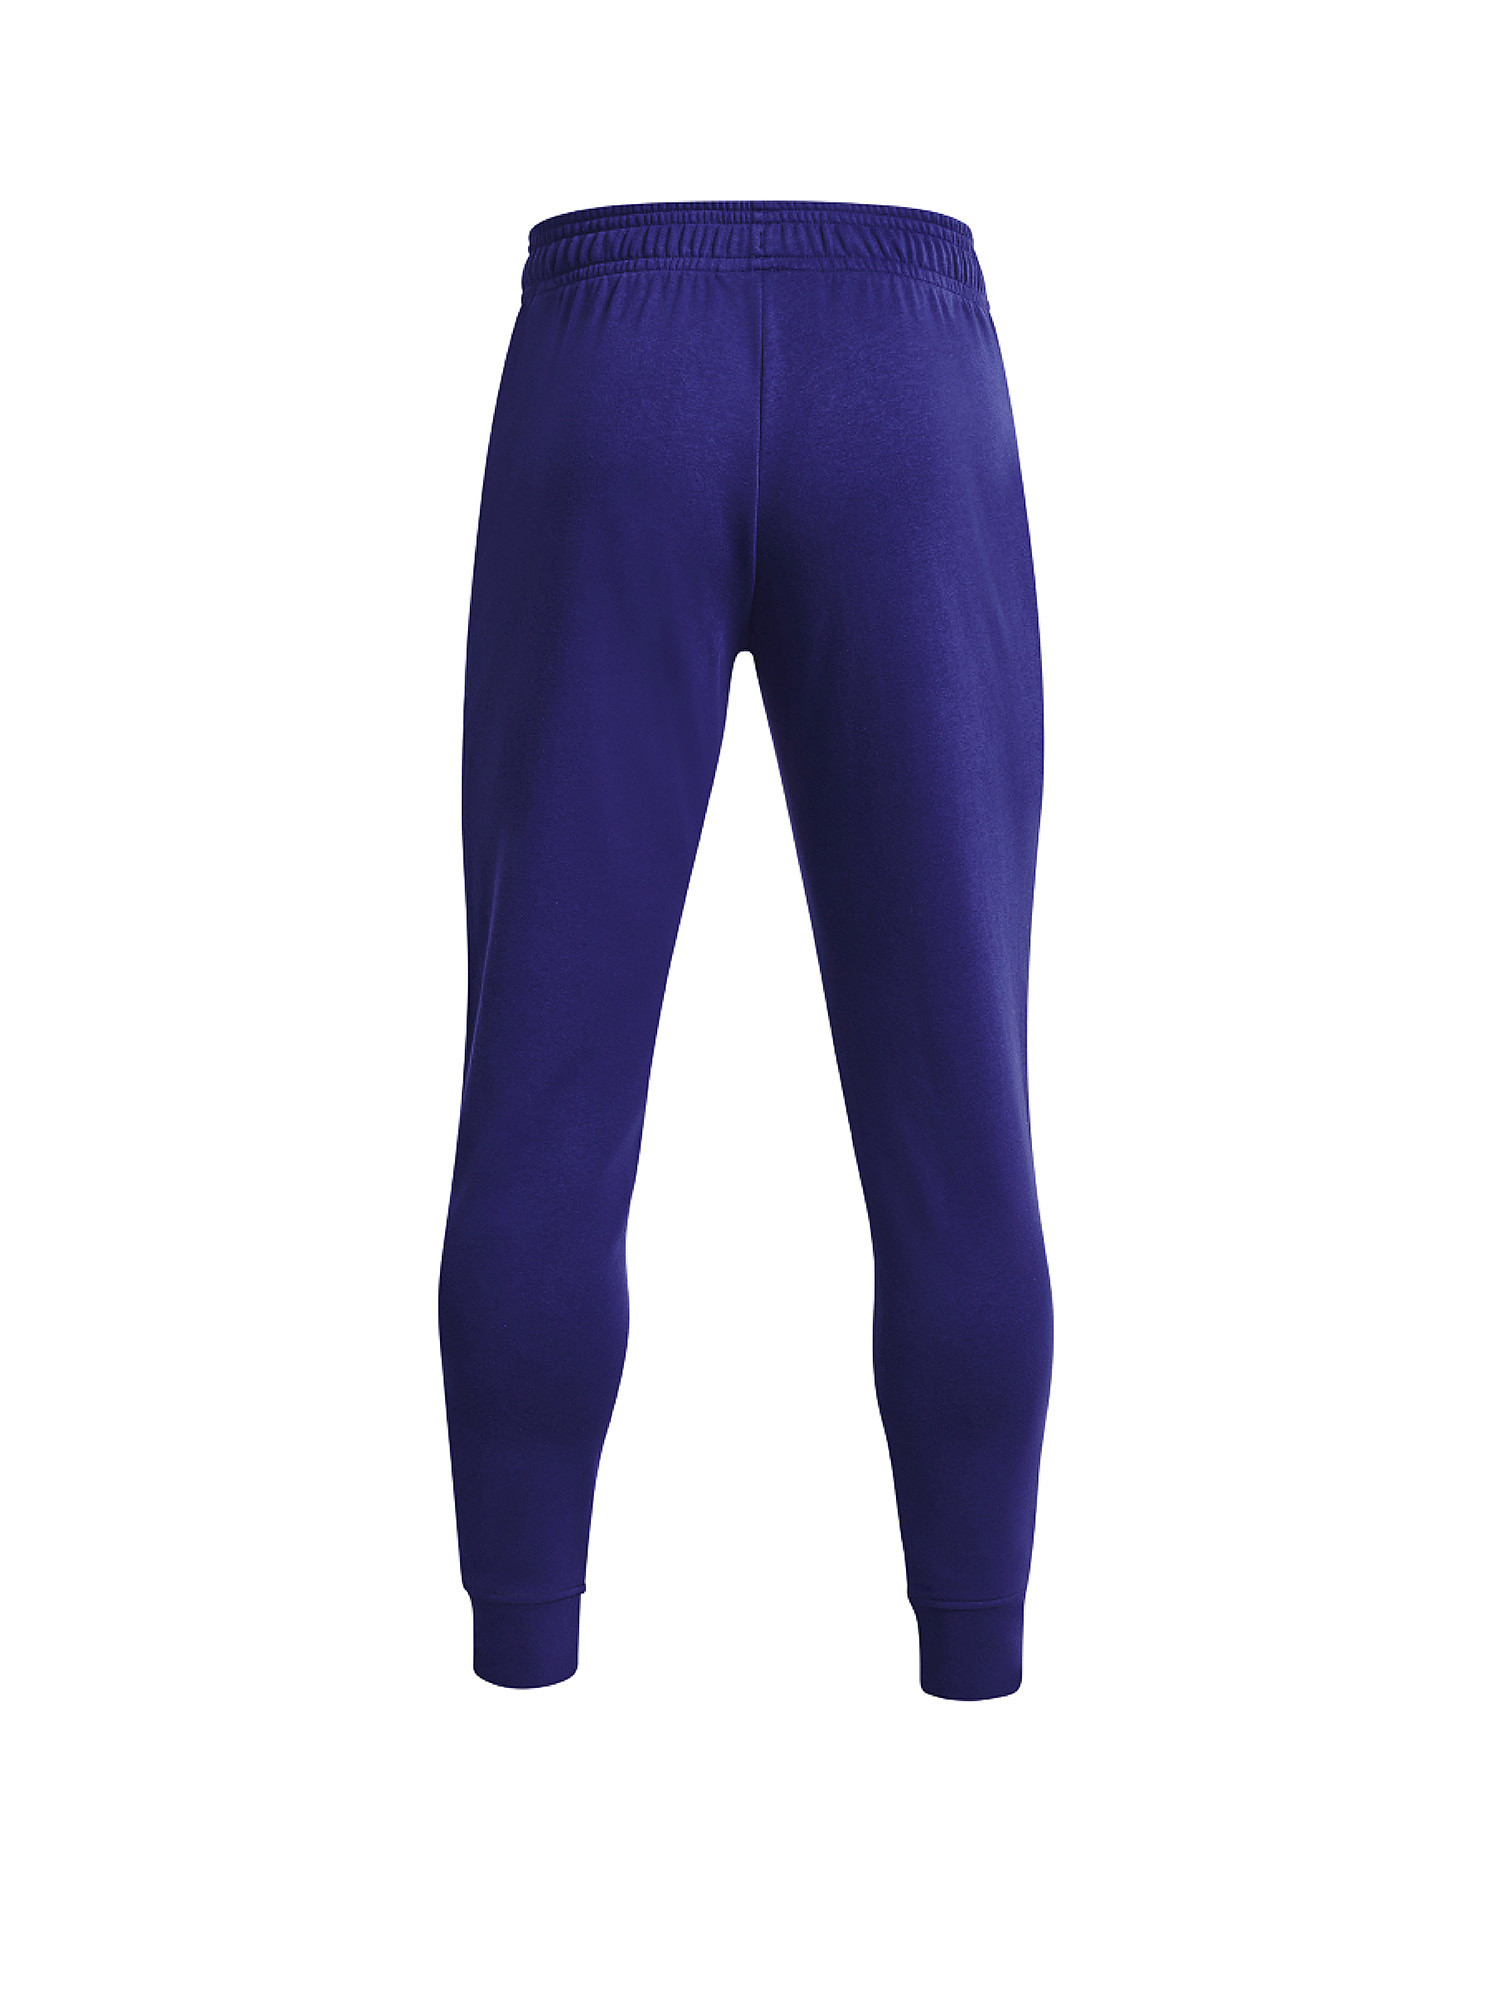 Under Armour - Joggers UA Rival Terry, Royal Blue, large image number 1